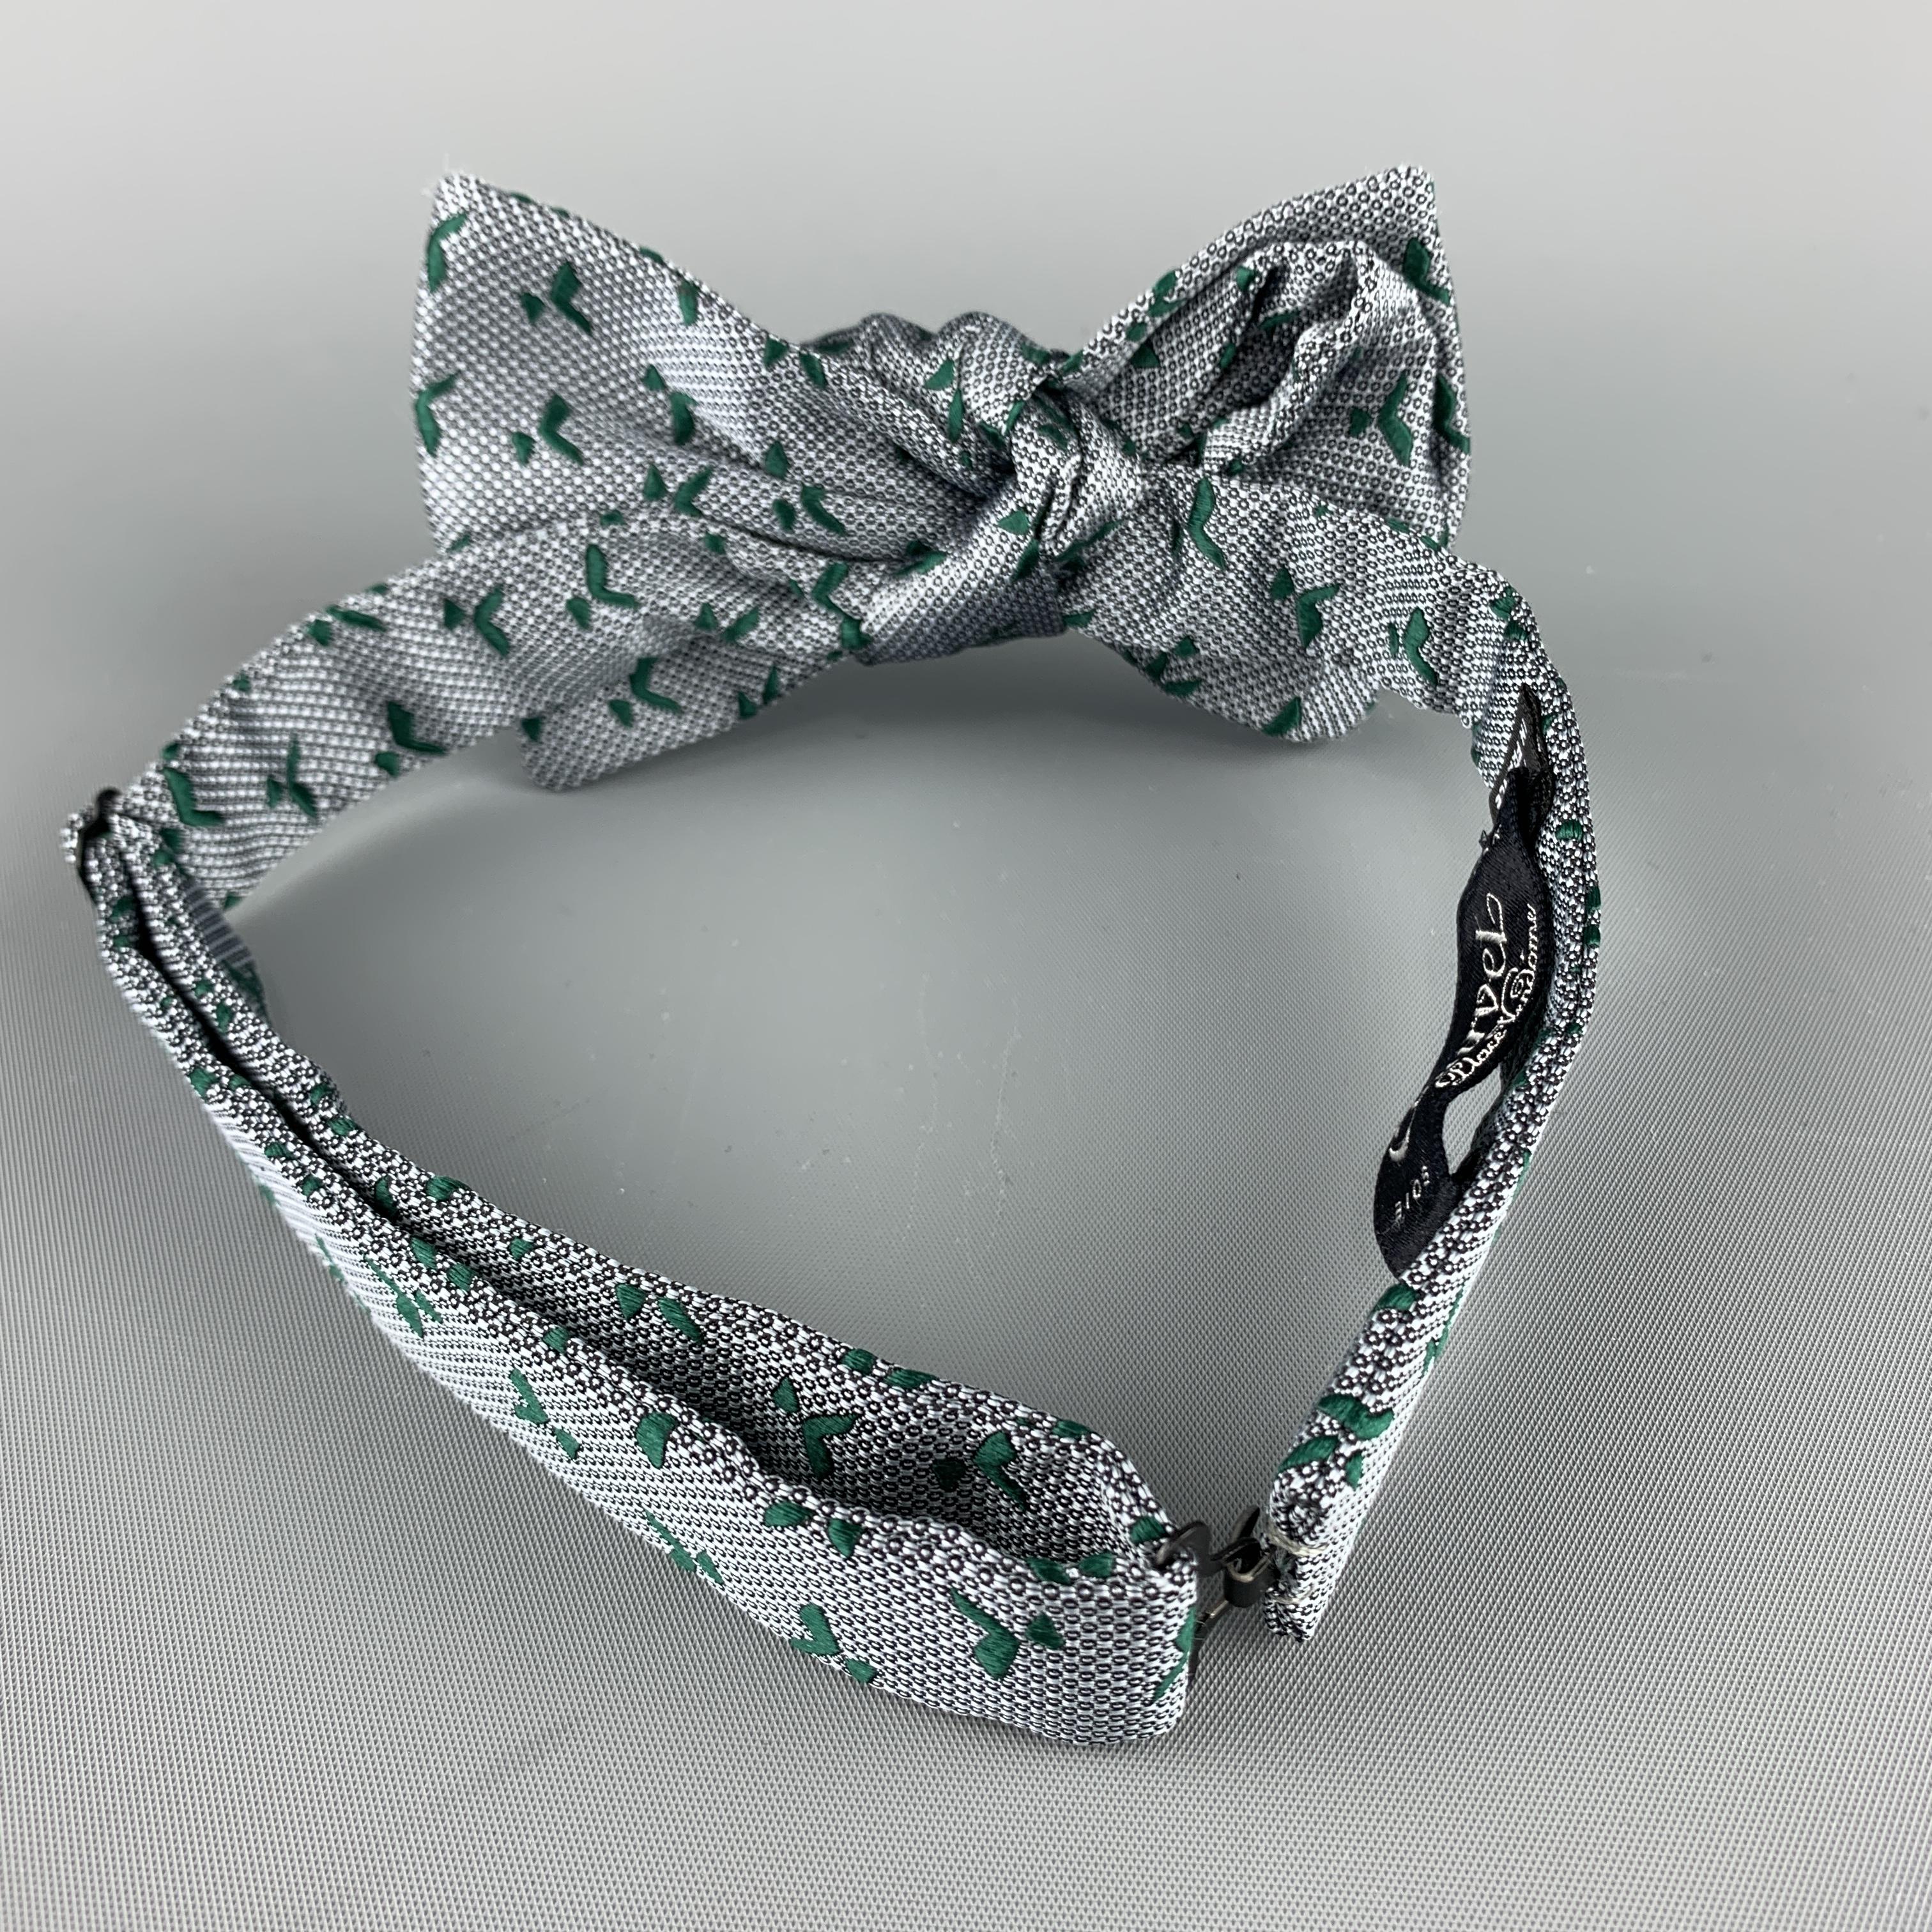 CHARVET bow tie comes in gray and green print silk with an adjustable neck. Made in France.

Excellent Pre-Owned Condition.